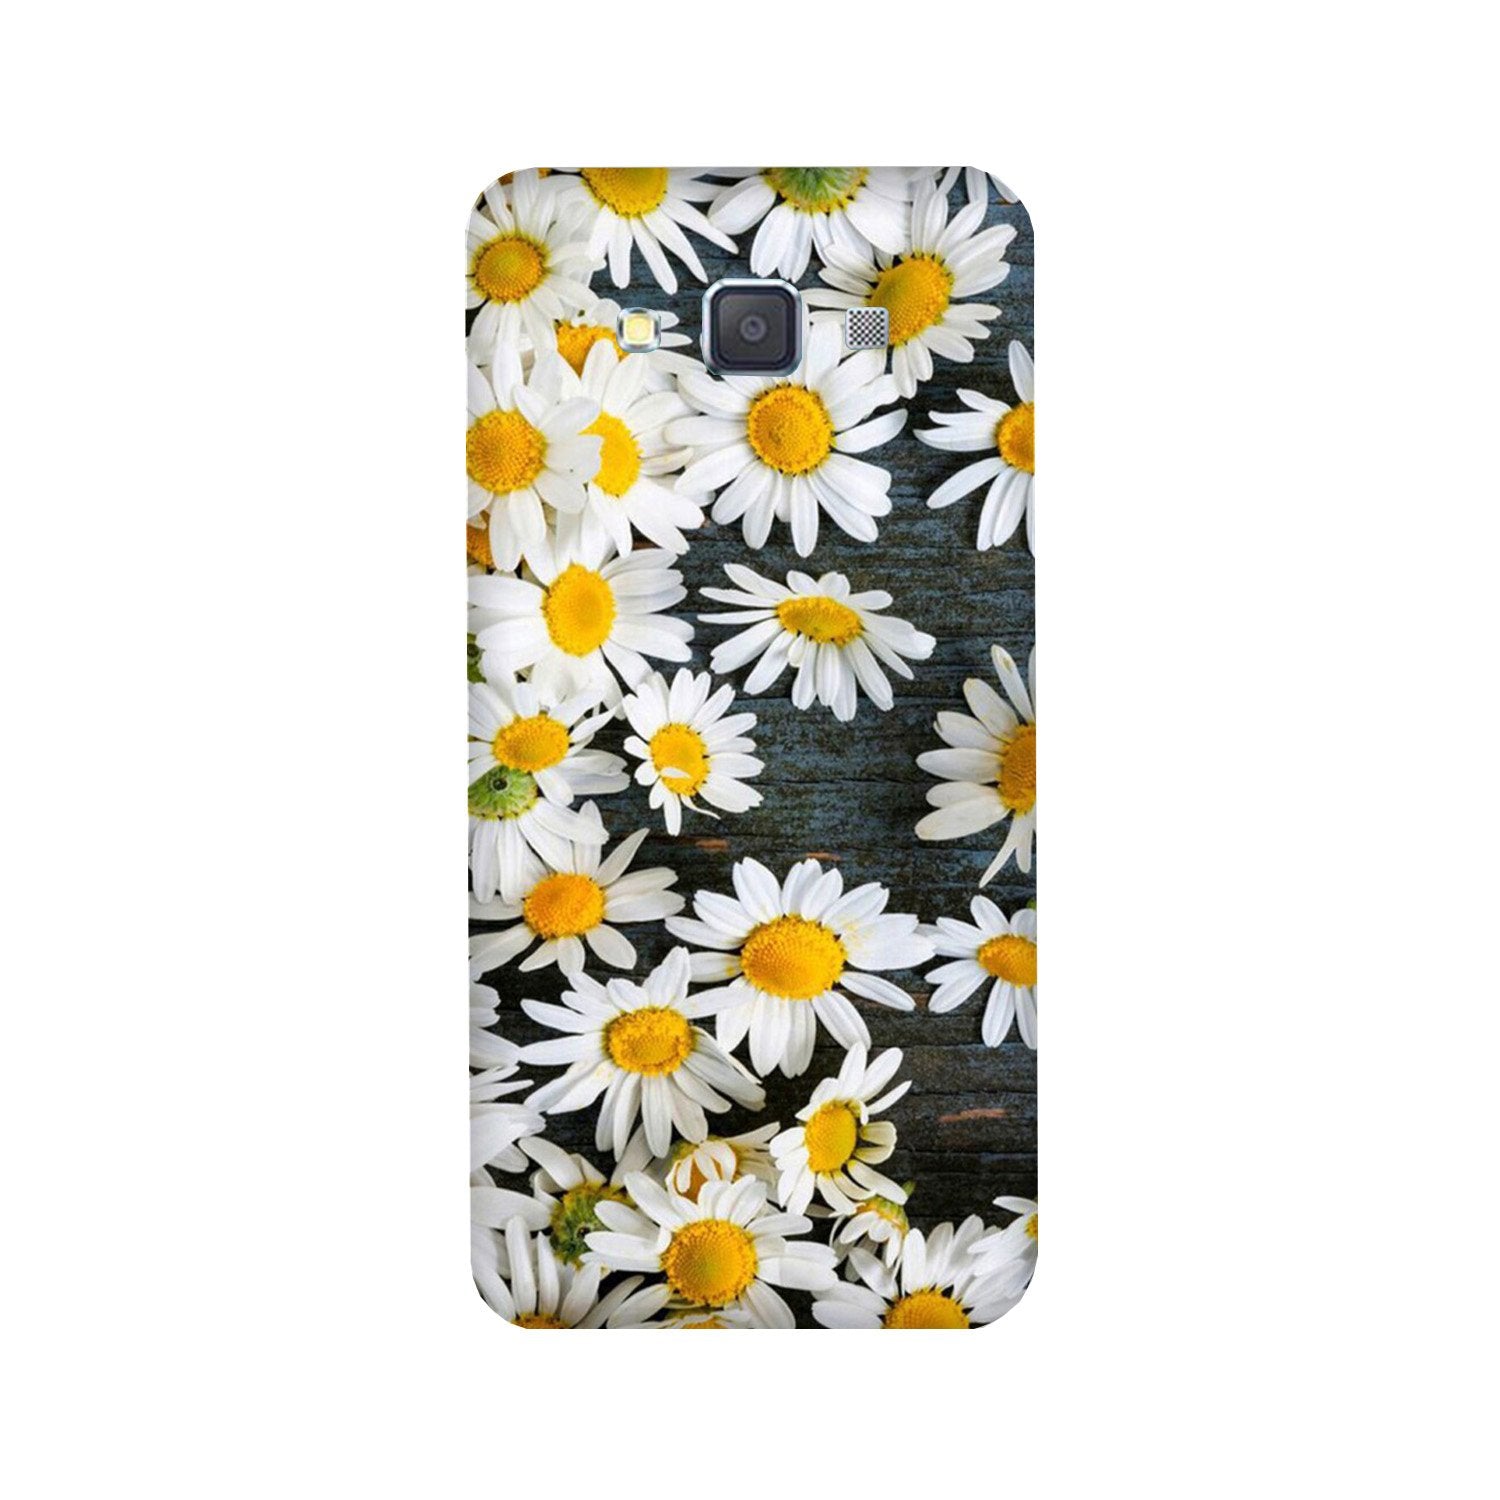 White flowers2 Case for Galaxy Grand Max